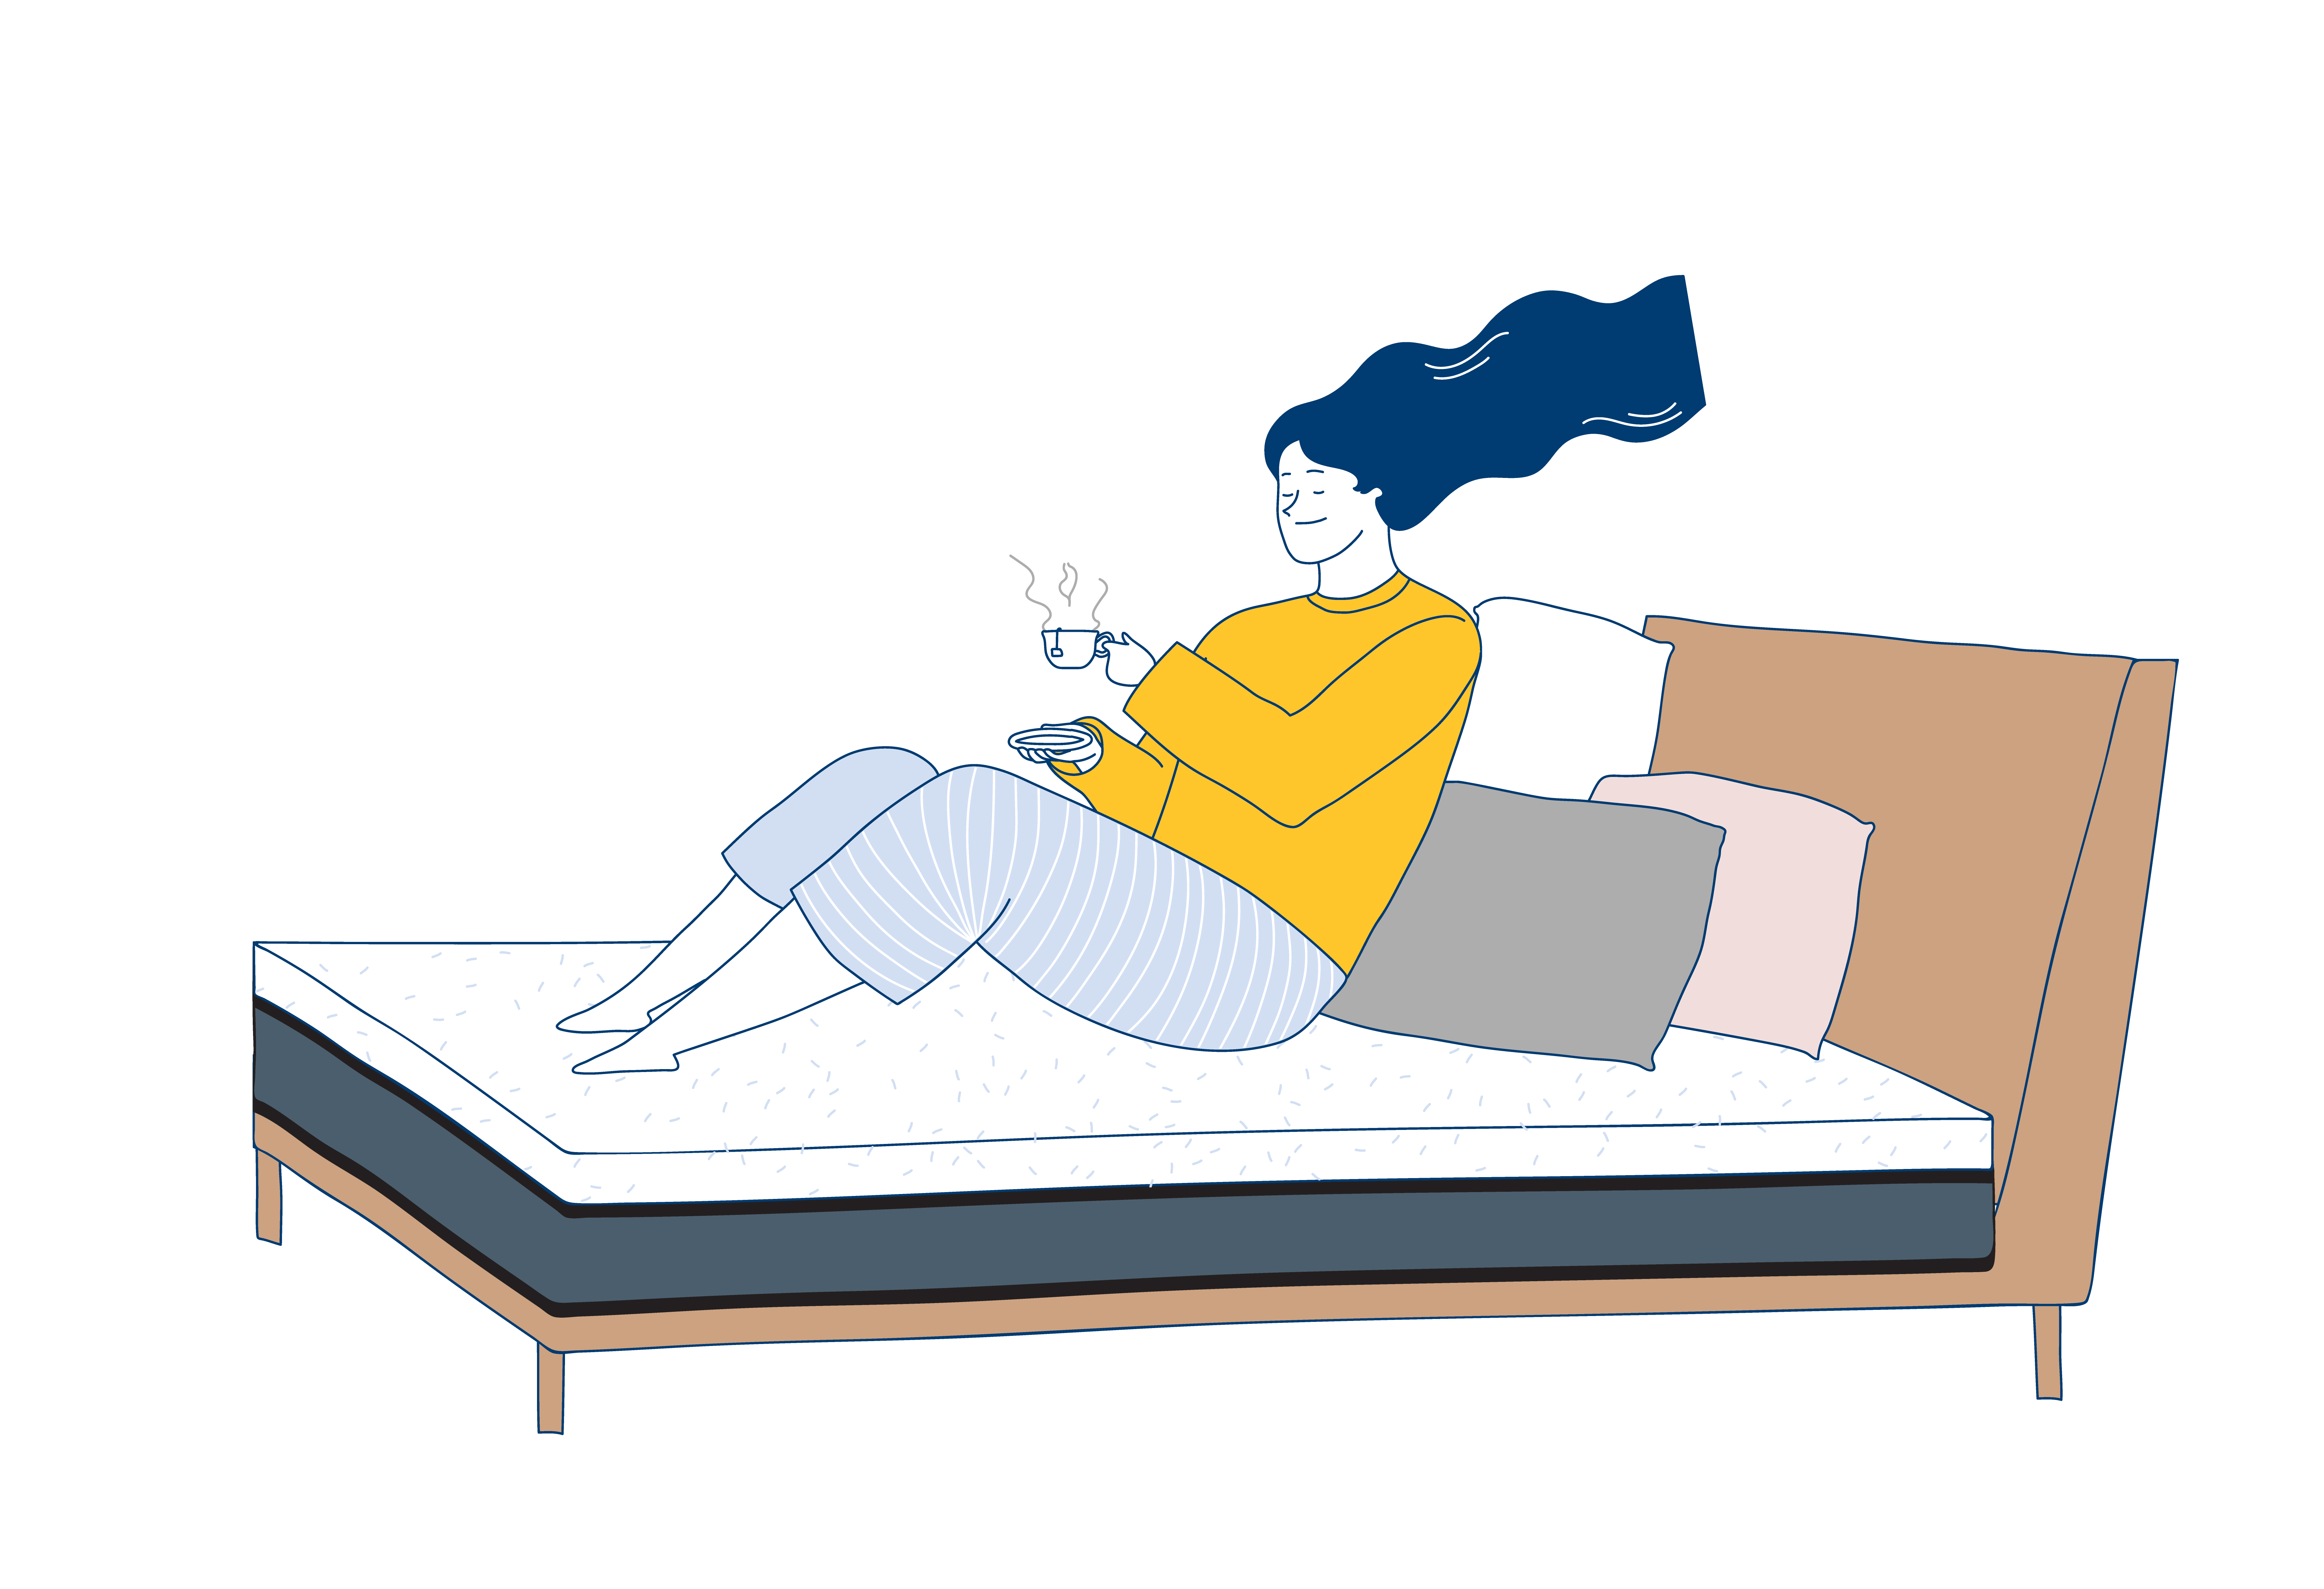 Cartoon image of a person drinking tea in bed